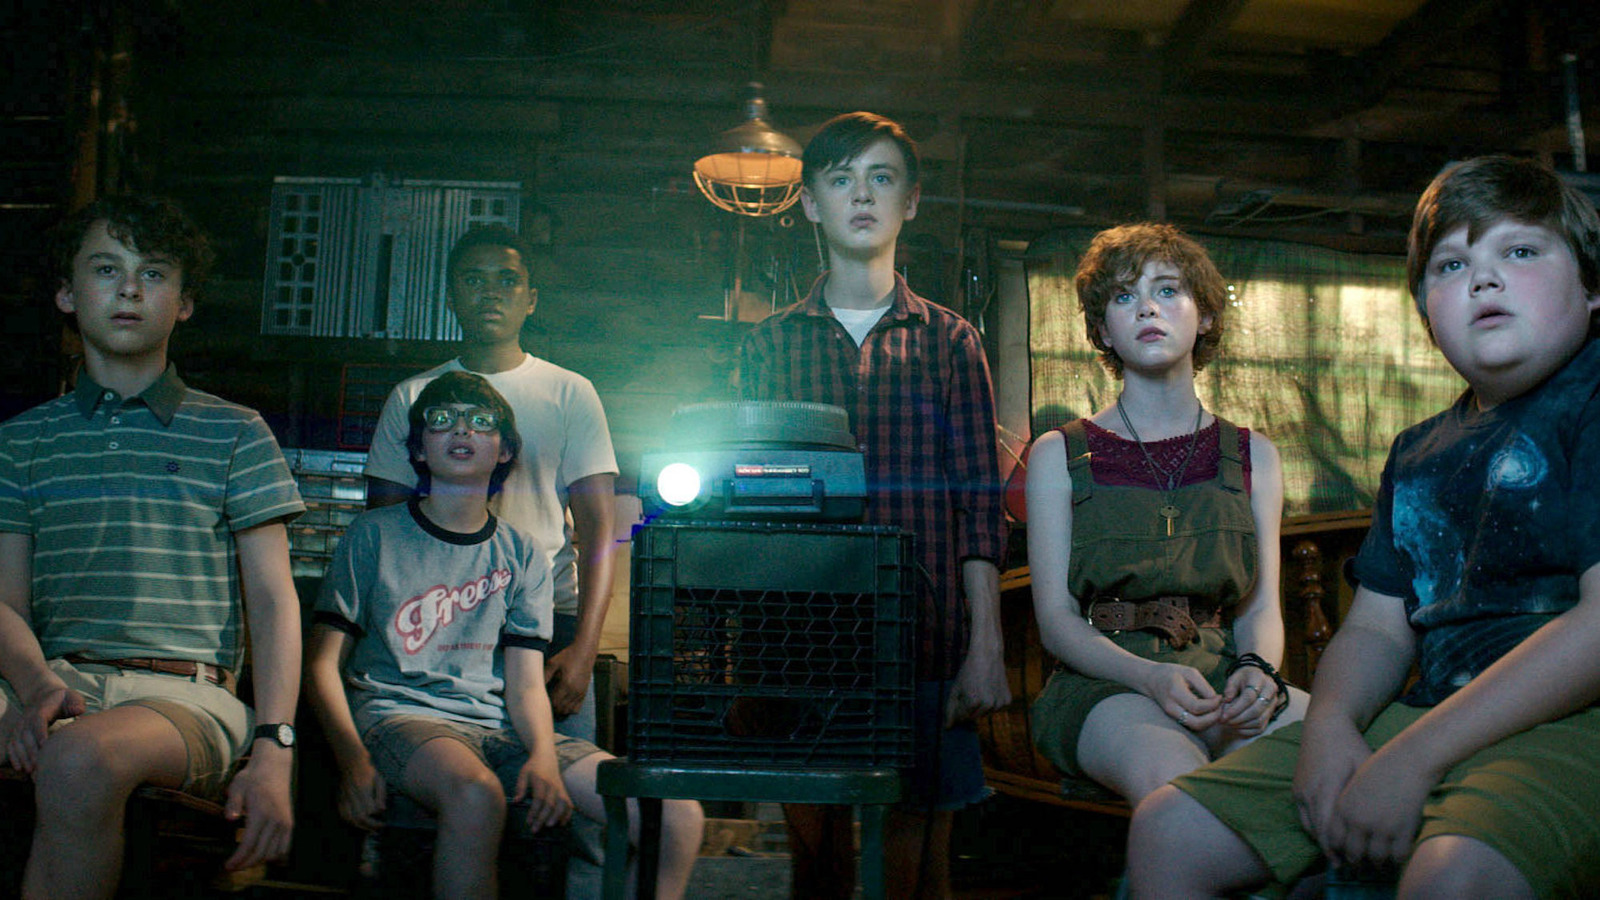 #IT Turns 5 Years Old And Has Its Young Cast To Thank For Its Continued Popularity